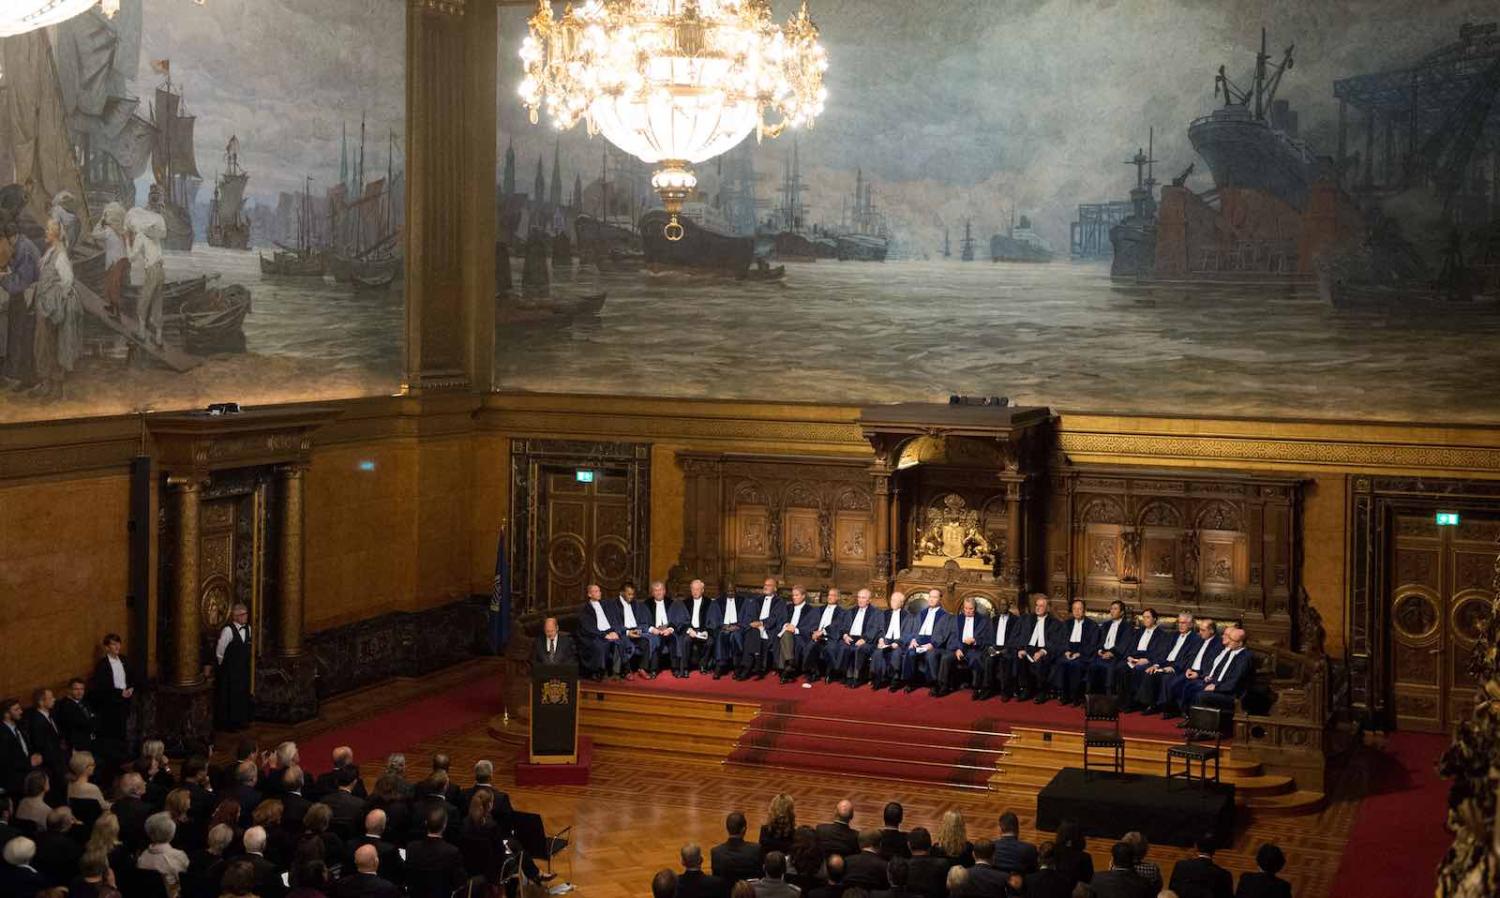 Ceremony for the 20th anniversary of the International Tribunal for the Law of the Sea in Hamburg, Germany, 7 October 2016 (Daniel Reinhardt/picture alliance via Getty Images)